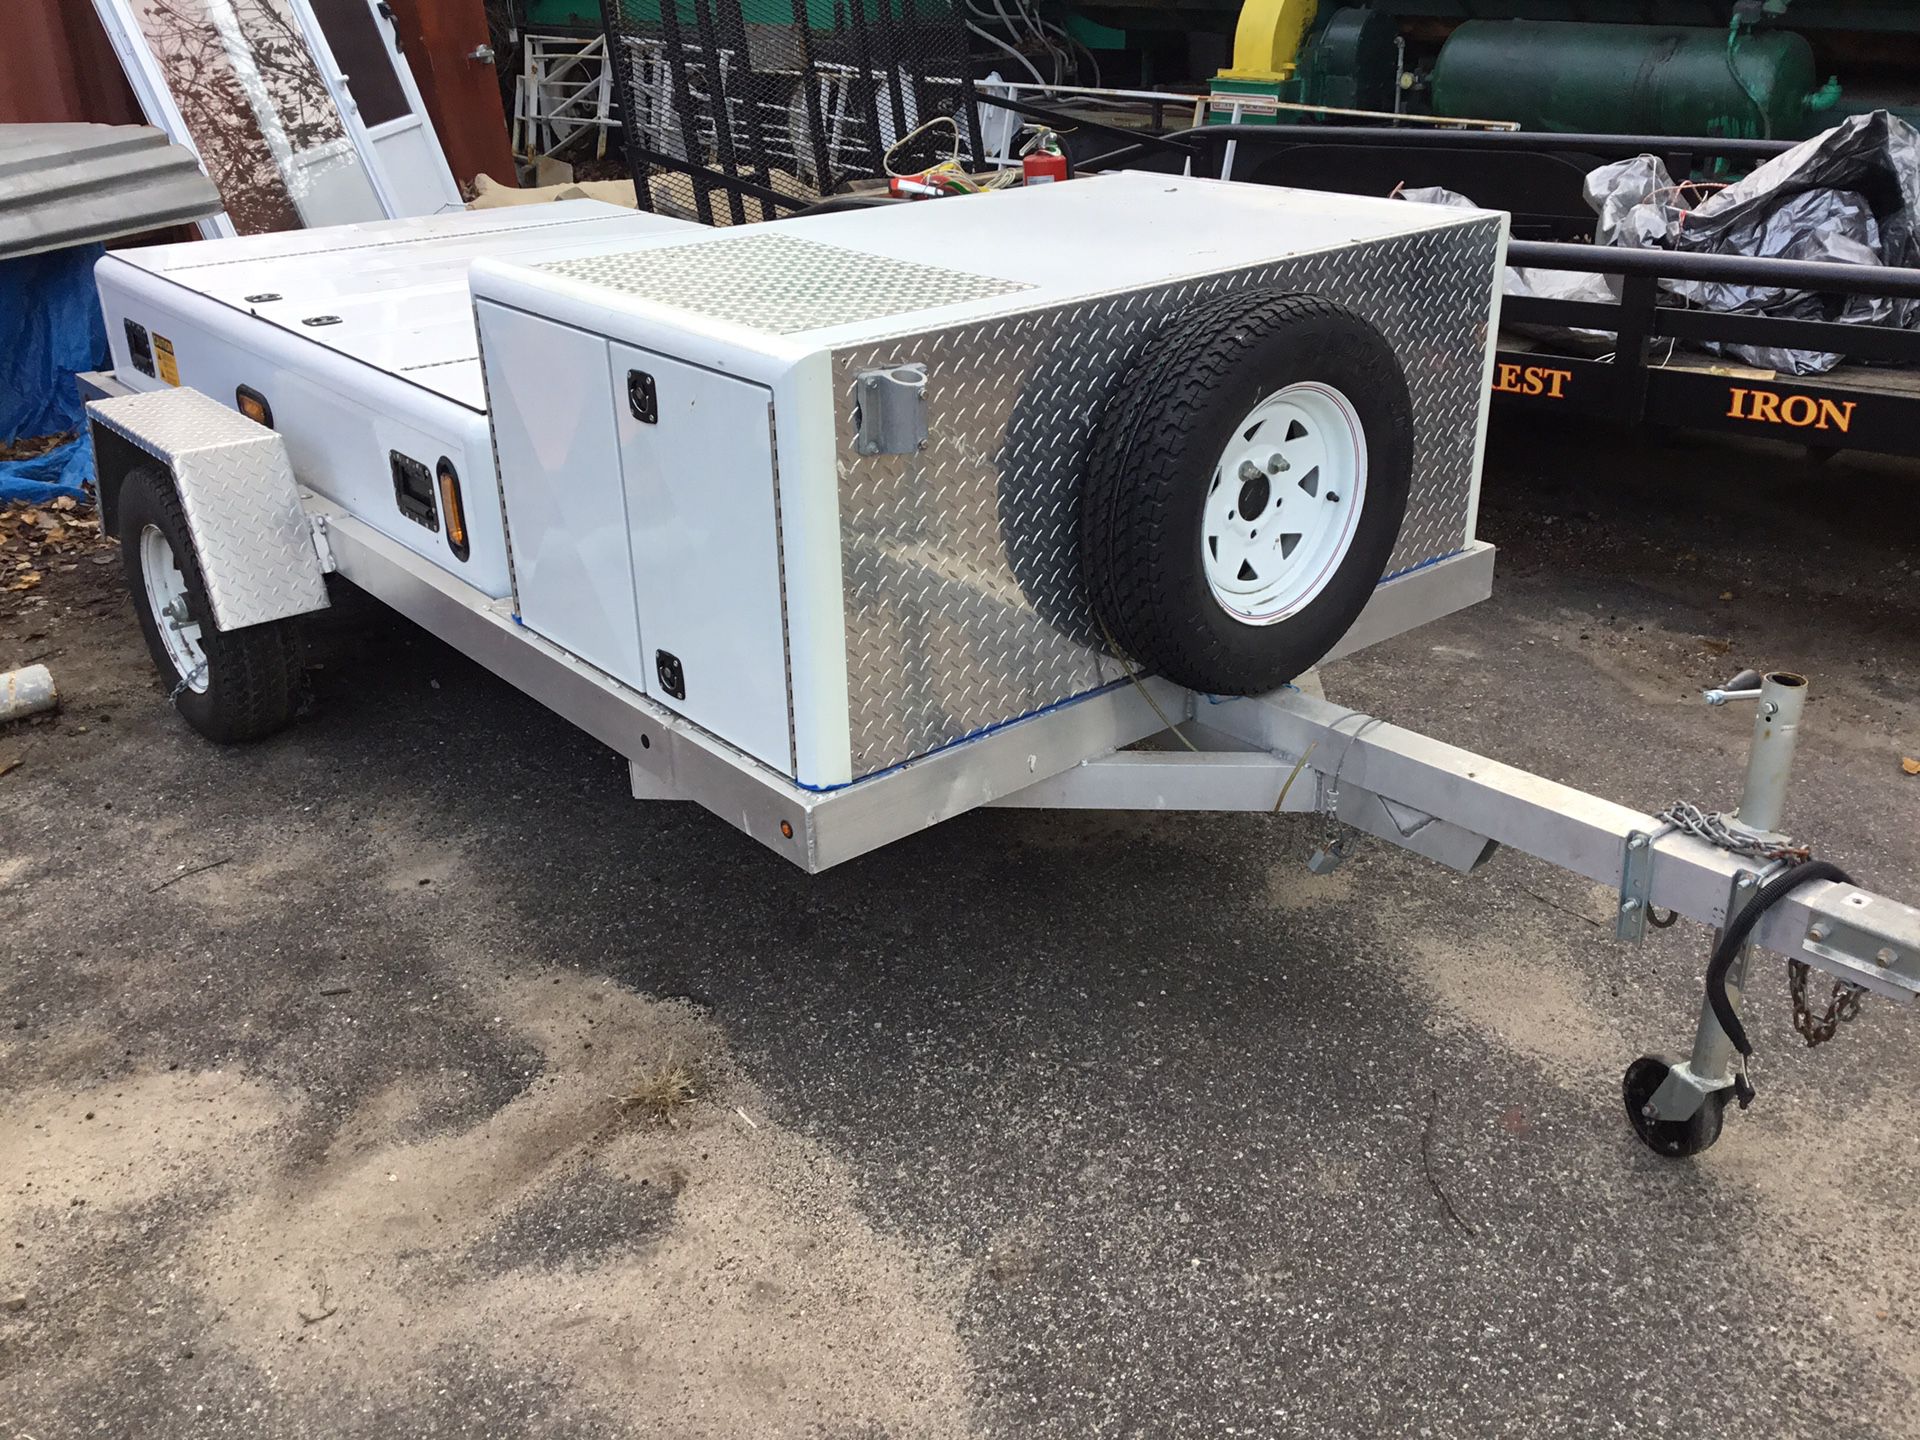 Communications aluminum trailer with dish and electronics. Make offer